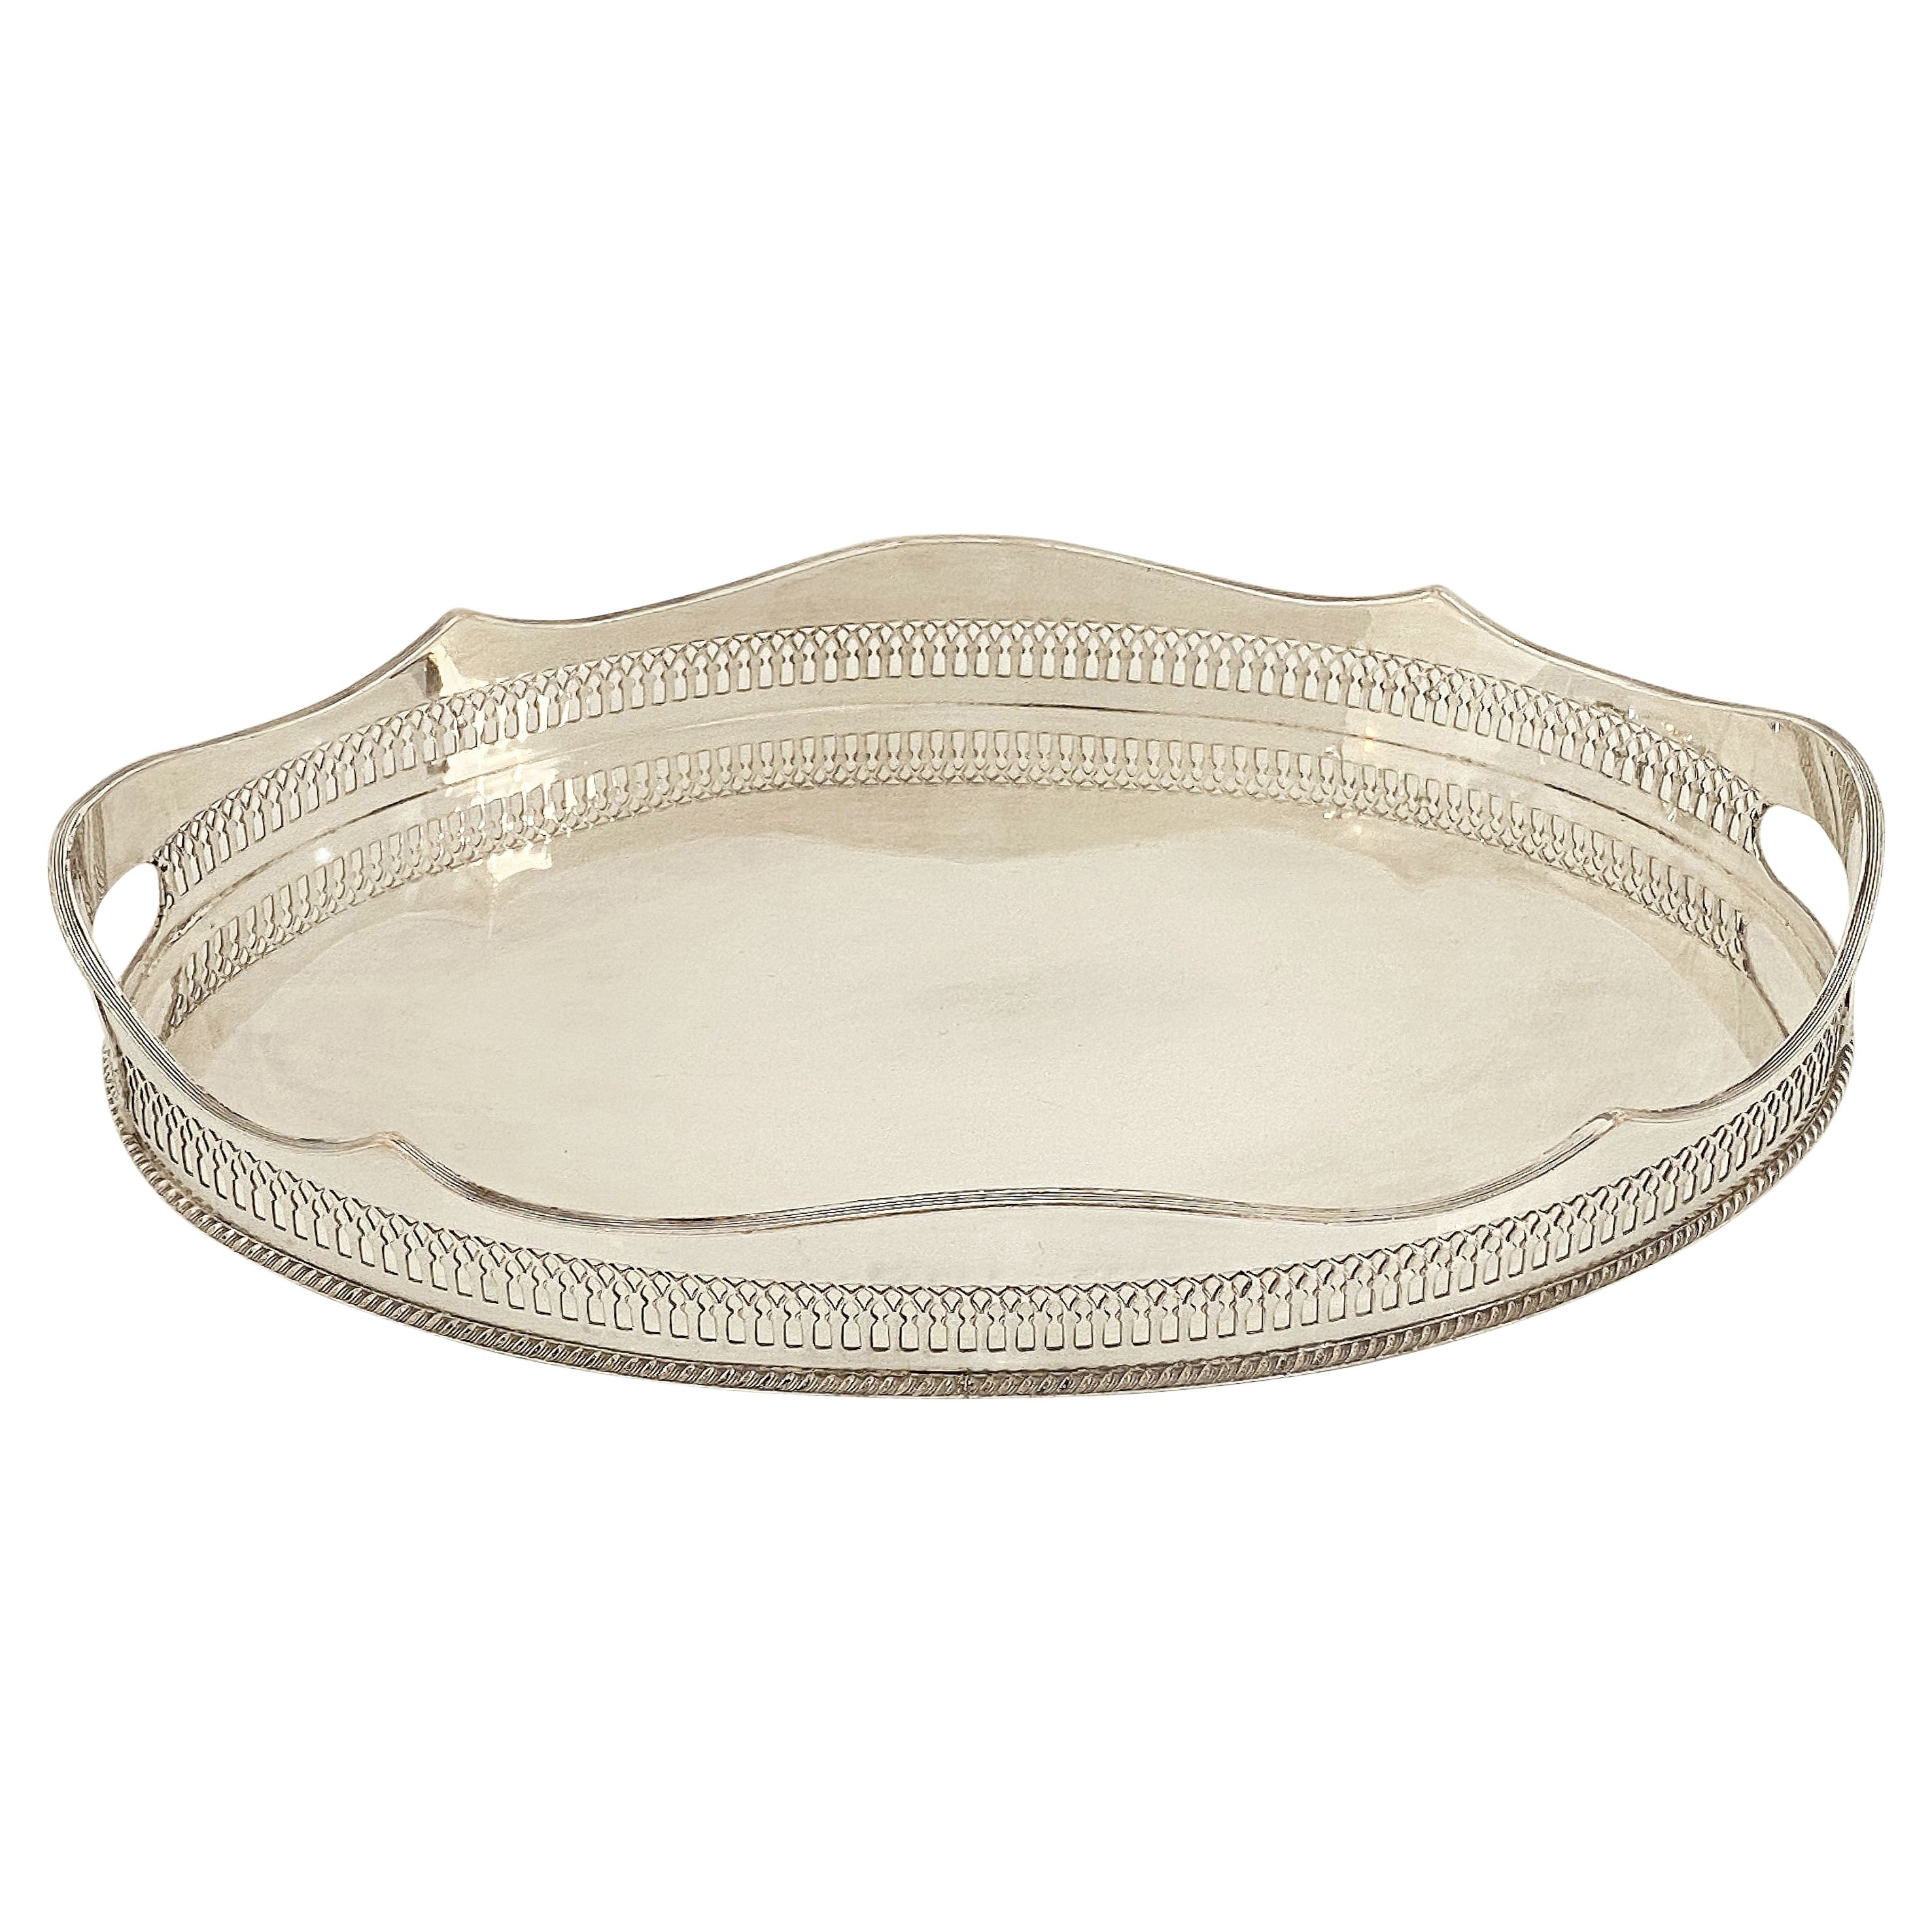 English Silver Oval Gallery Serving or Drinks Tray For Sale